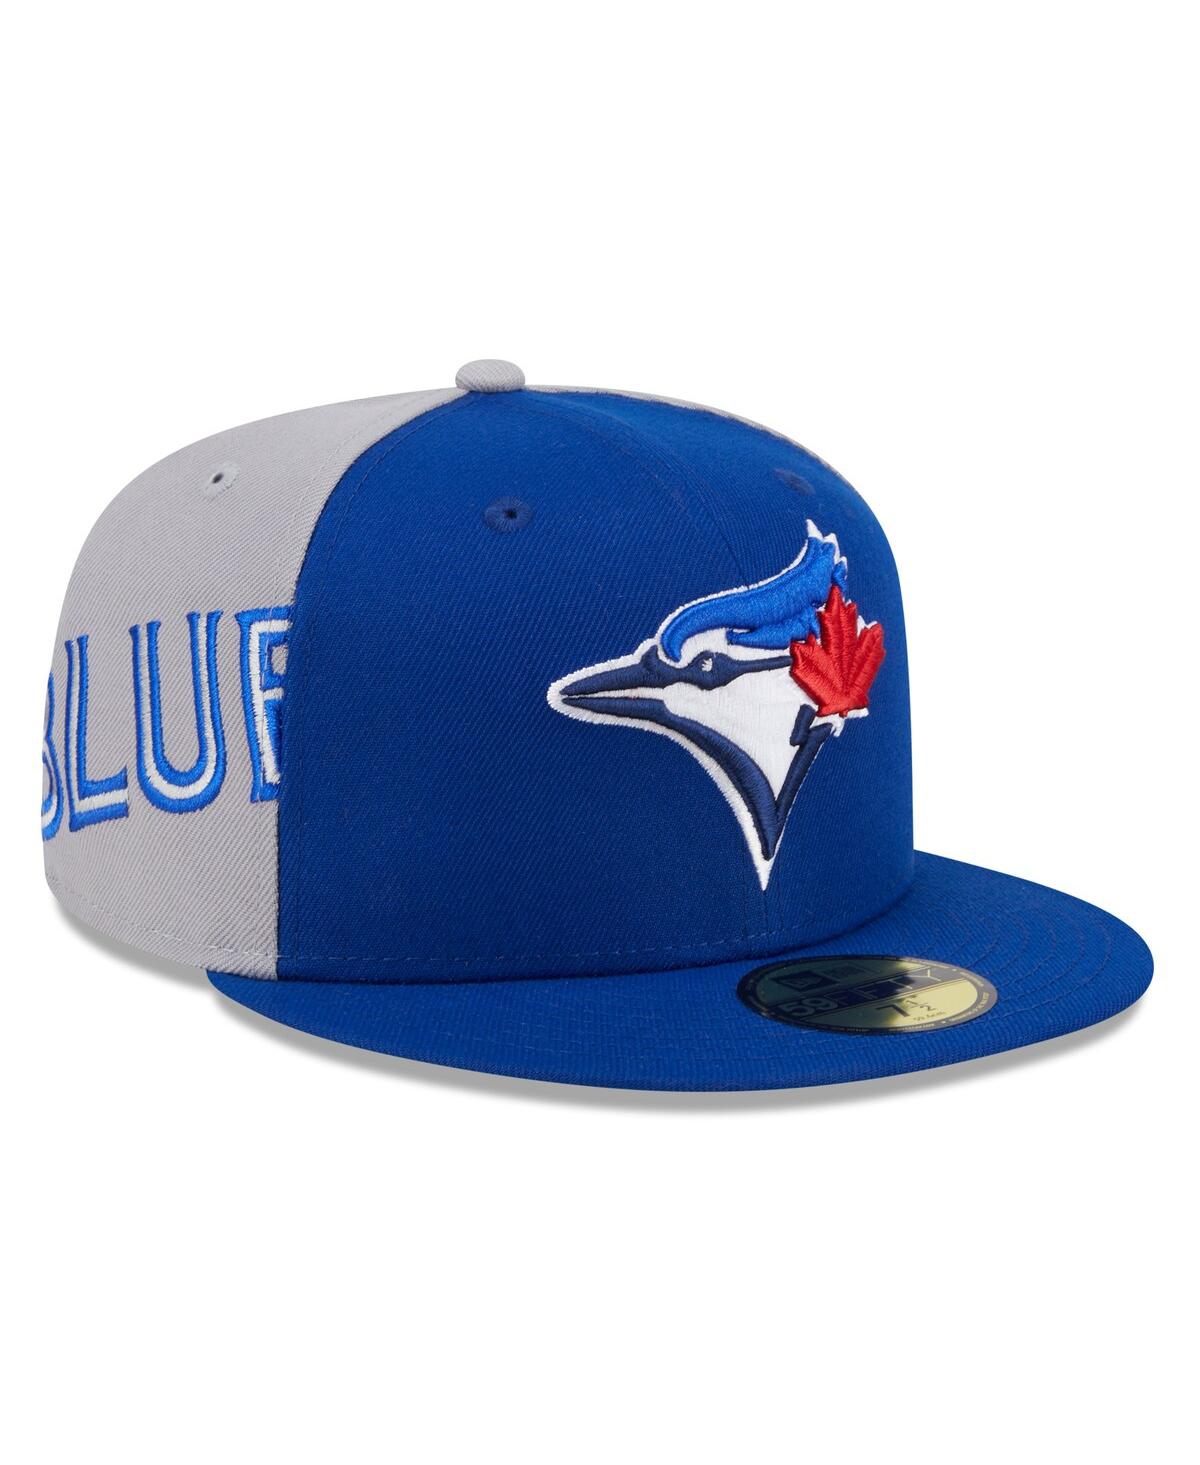 Men's Royal/Gray Toronto Blue Jays Gameday Sideswipe 59Fifty Fitted Hat - Royal Gray